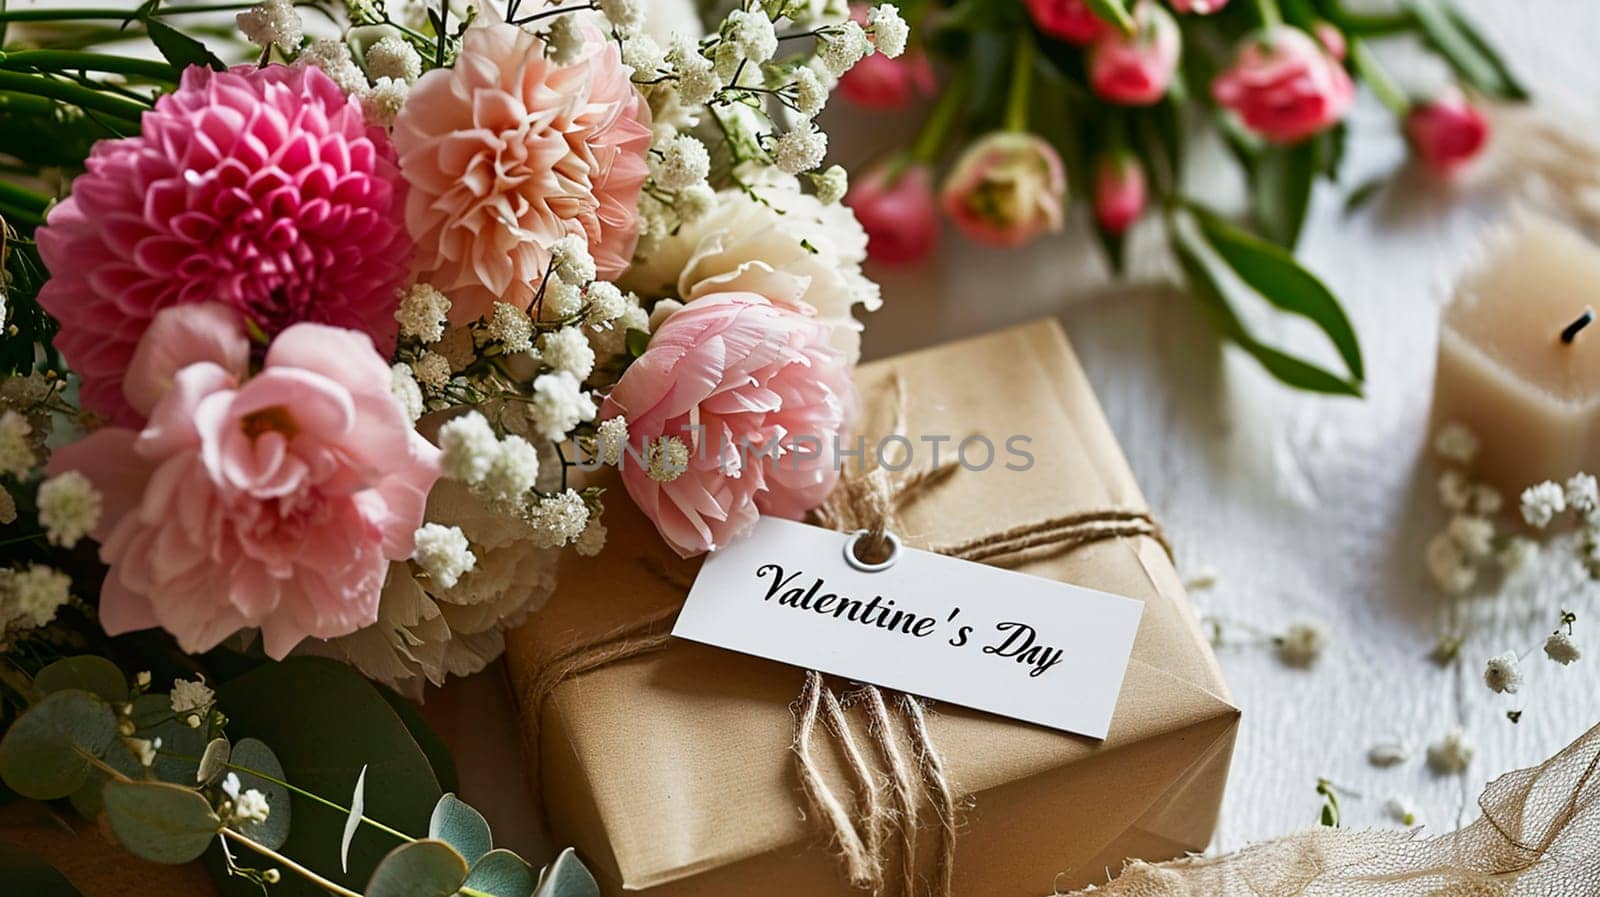 Gift box and flowers for Valentine's Day. Selective focus. by yanadjana